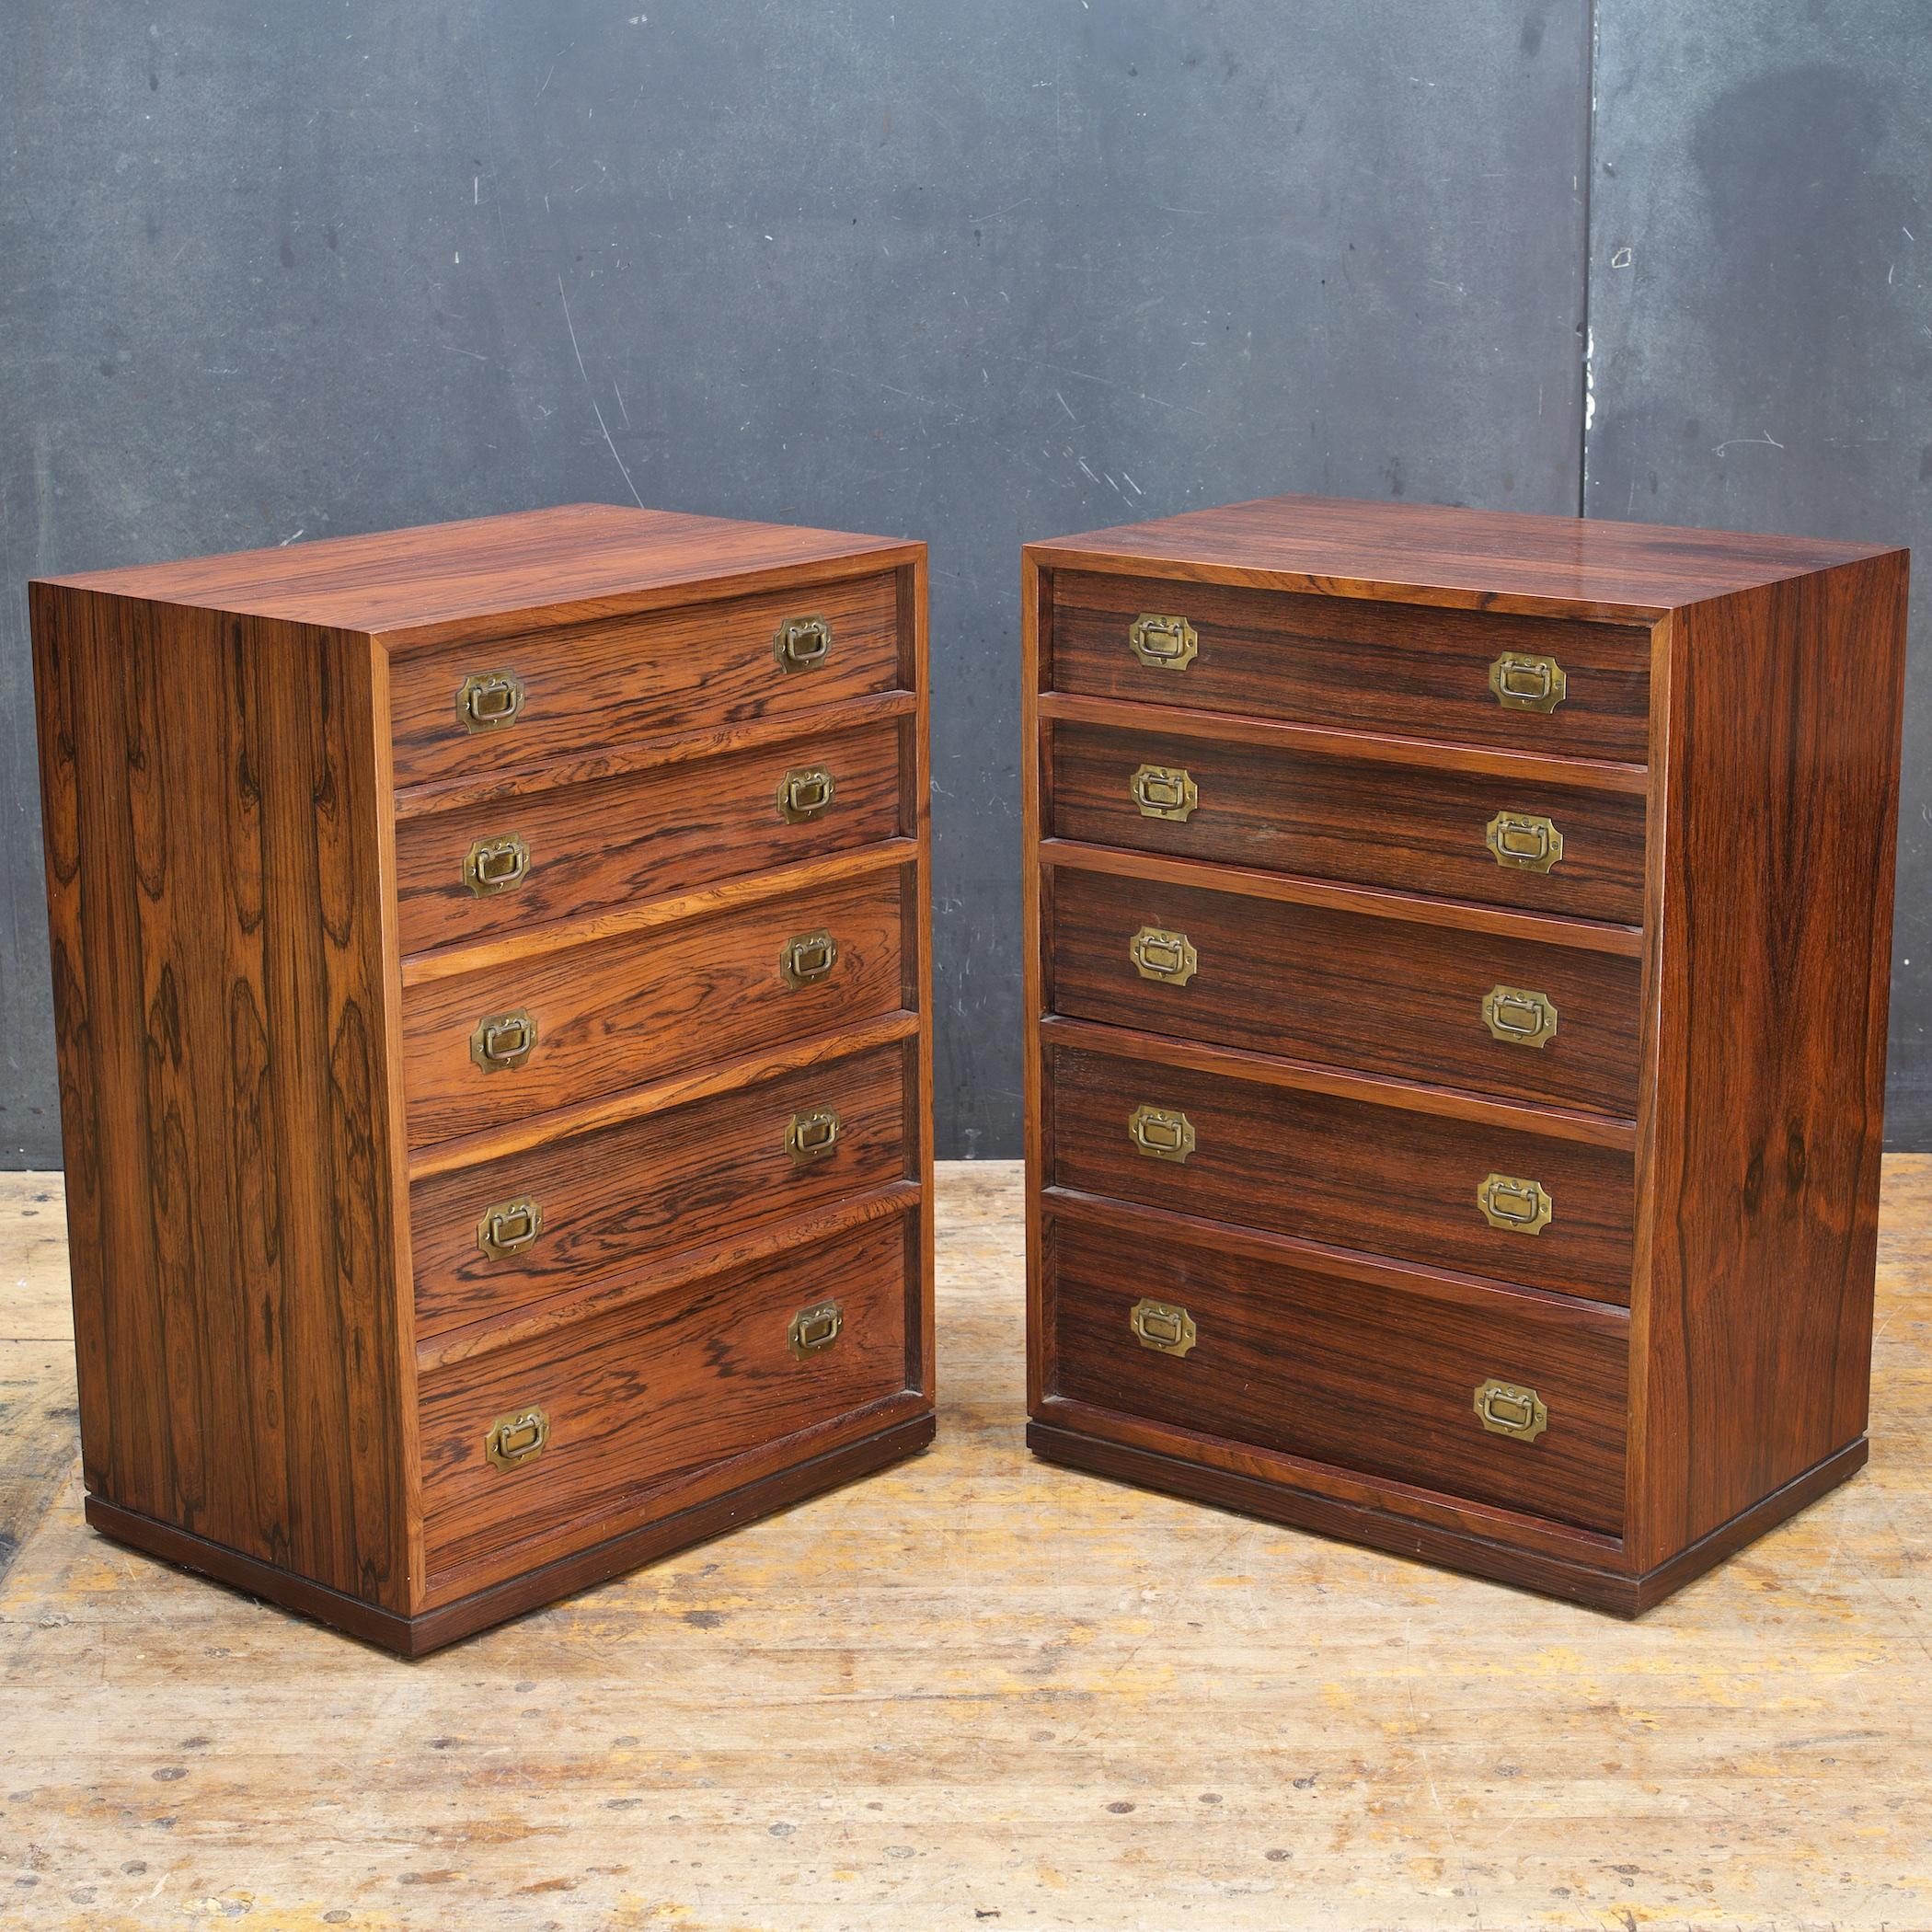 A beautiful pair of petite rosewood campaign style jewelry chests or nightstands designed by Henning Korch for Silkeborge Mobelfabrik. Each with five drawers, interiors are made of mahogany with brass pulls.

These can also be sold separately upon